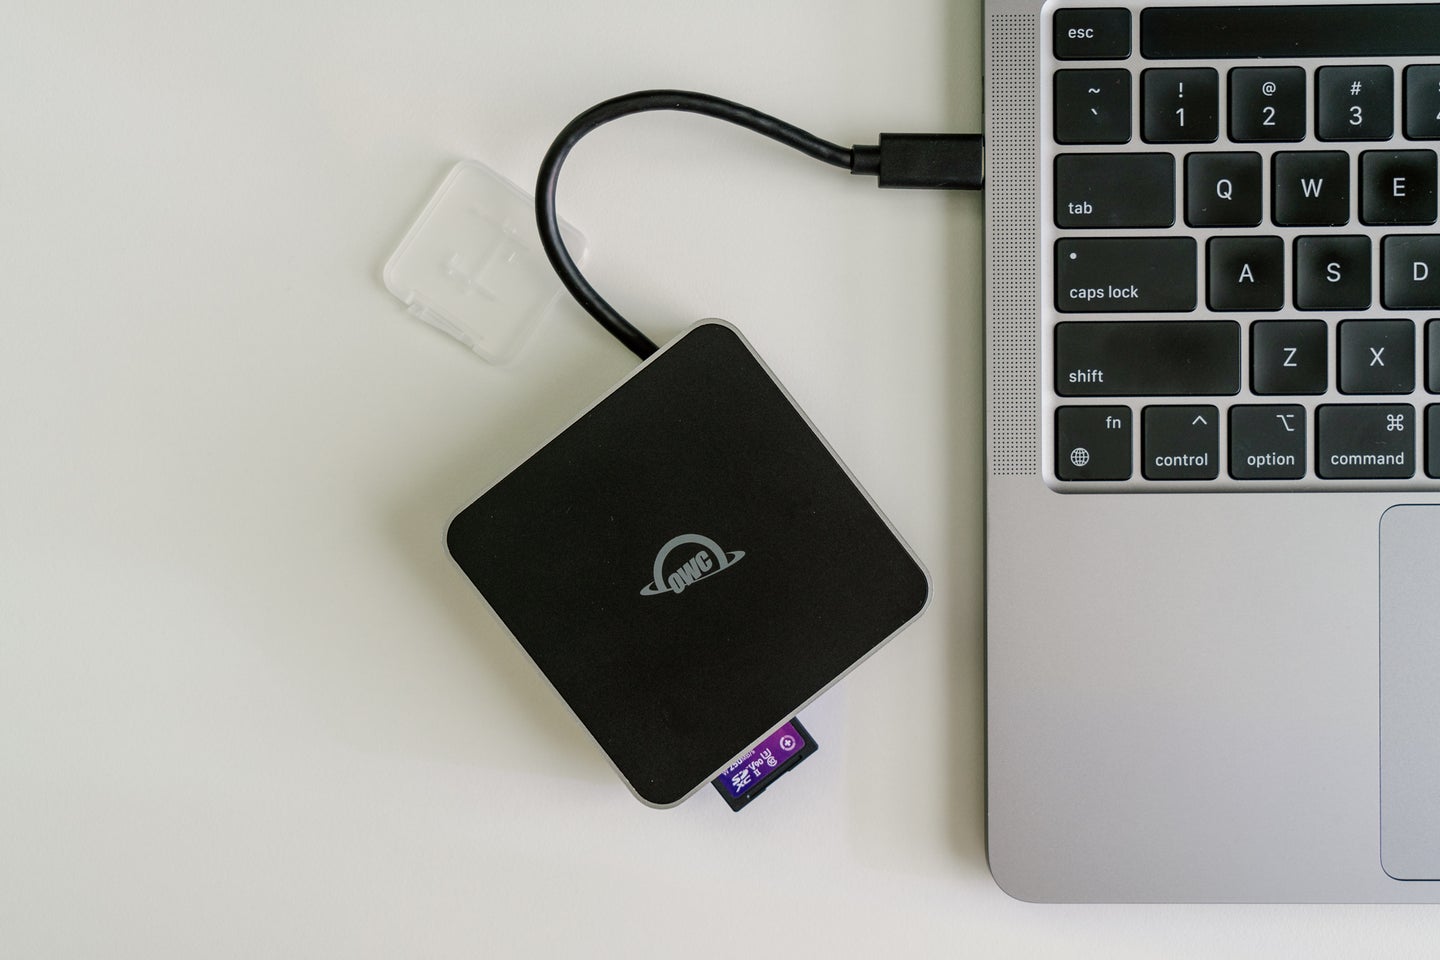 An OWC memory card reader connected to a laptop